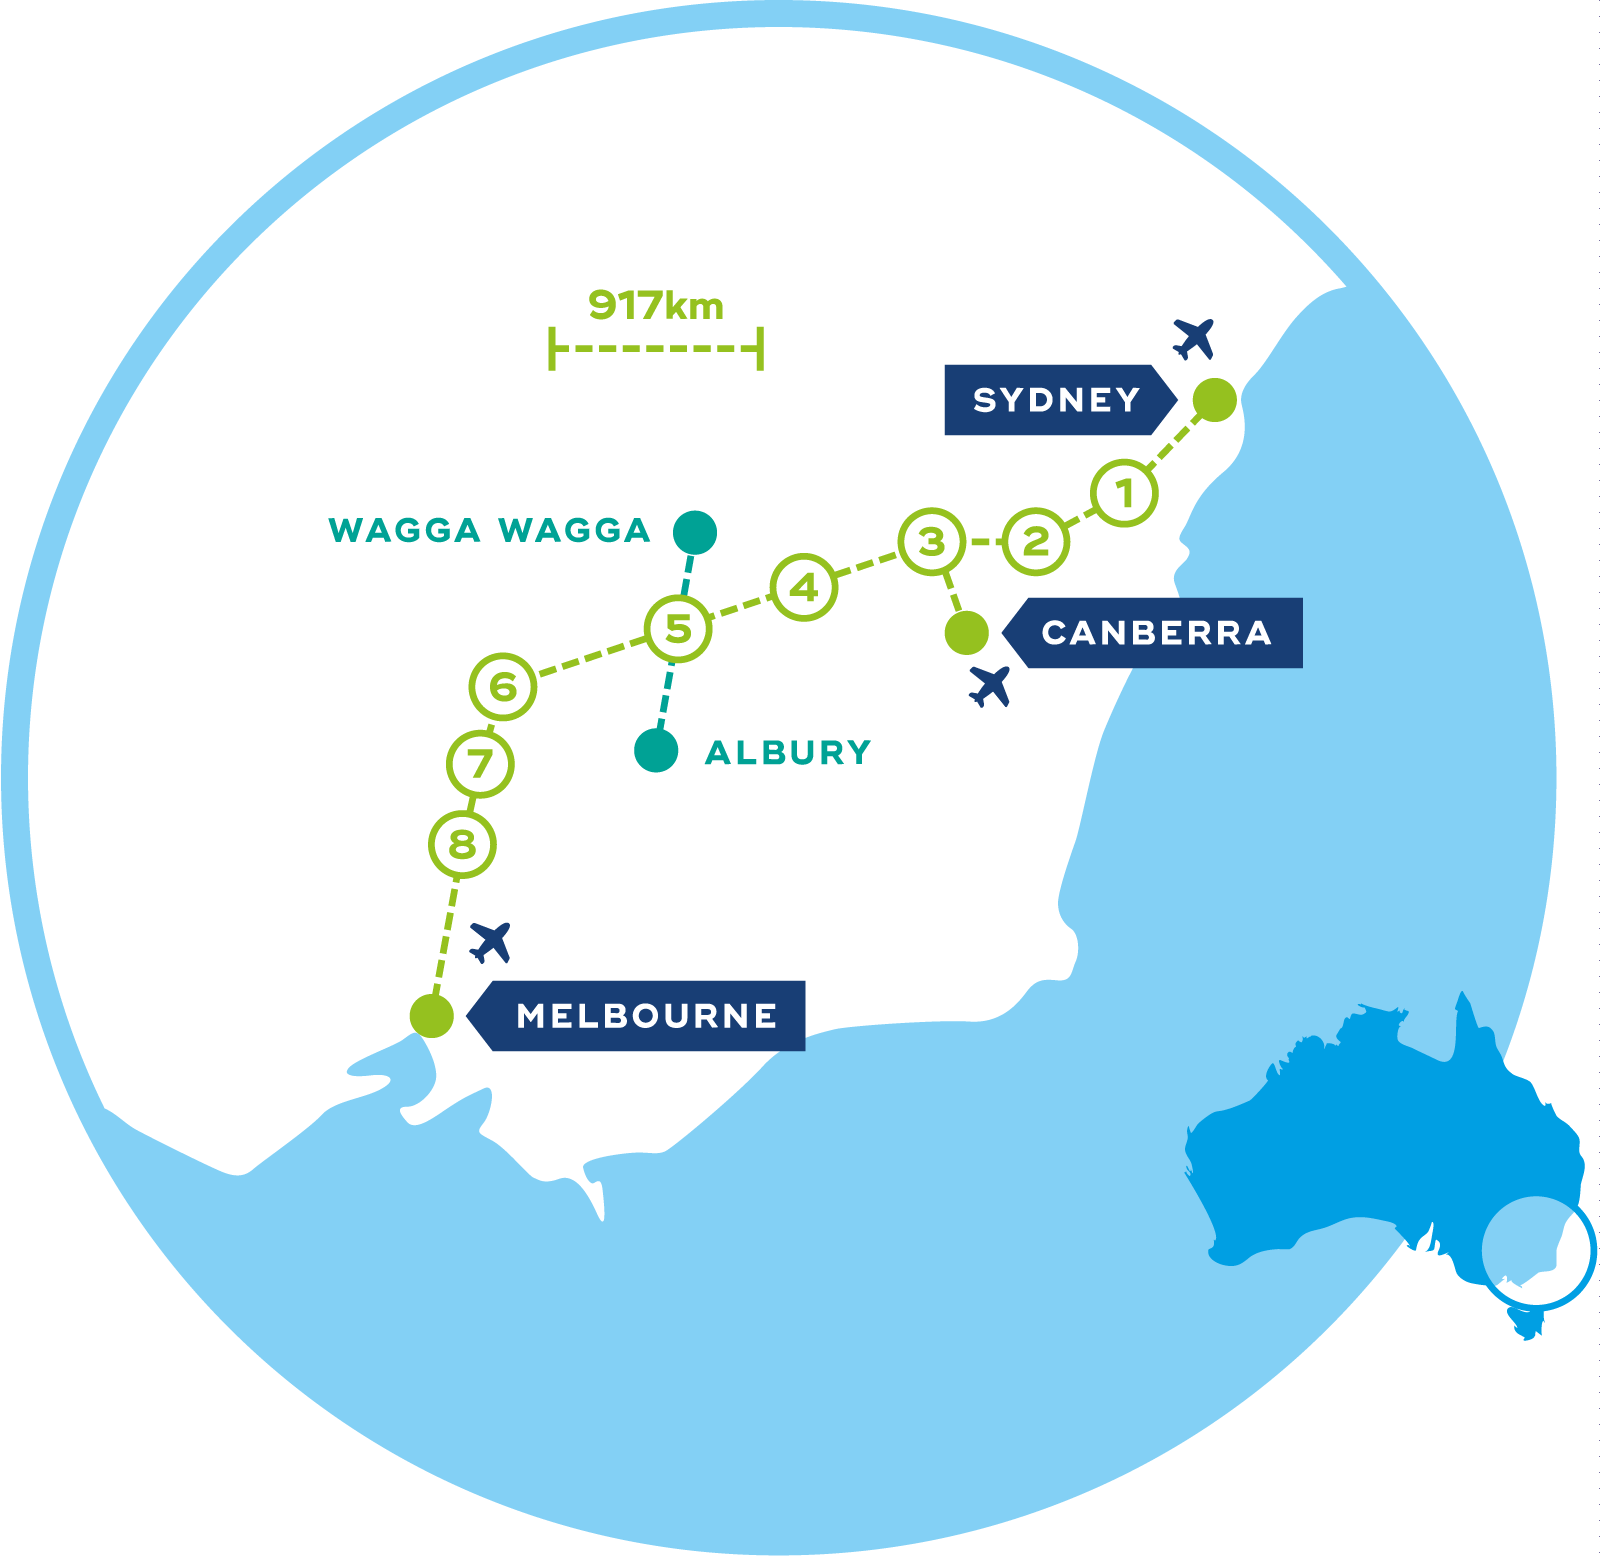 CLARA Melbourne–Sydney high-speed rail route map showing branch lines to Albury and Wagga Wagga